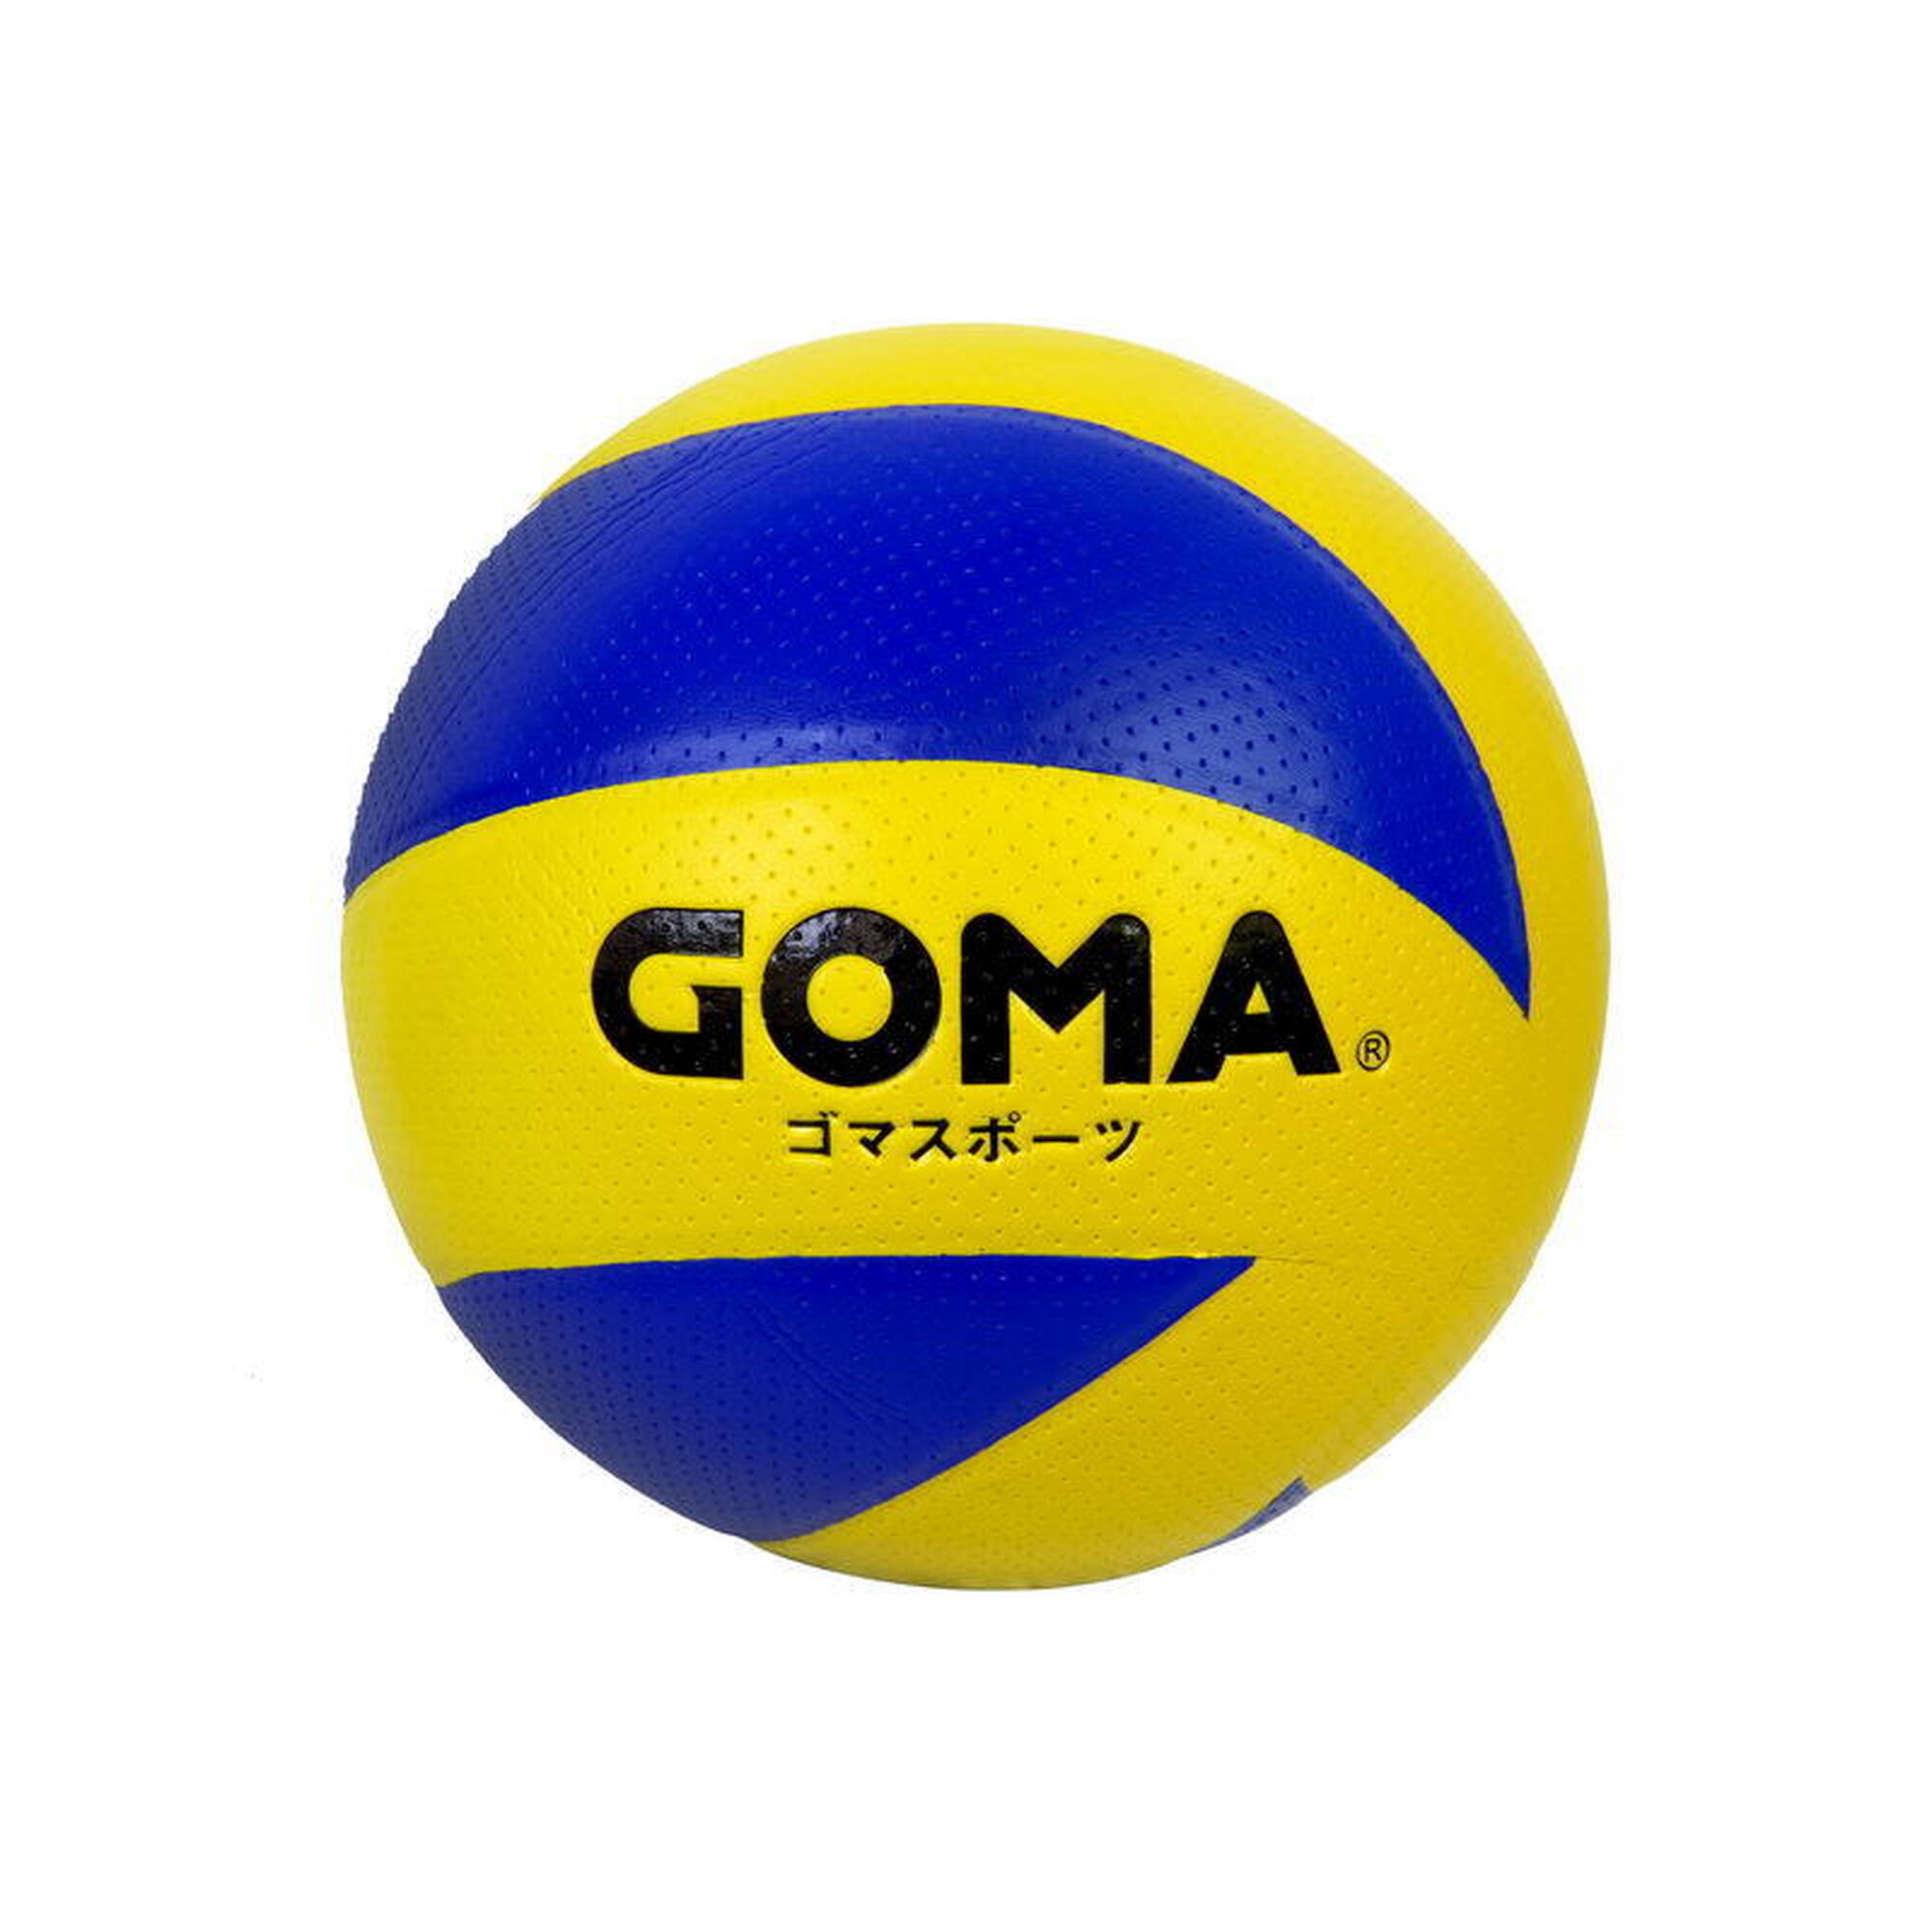 GOMA VB5 PVC Leather Volleyball